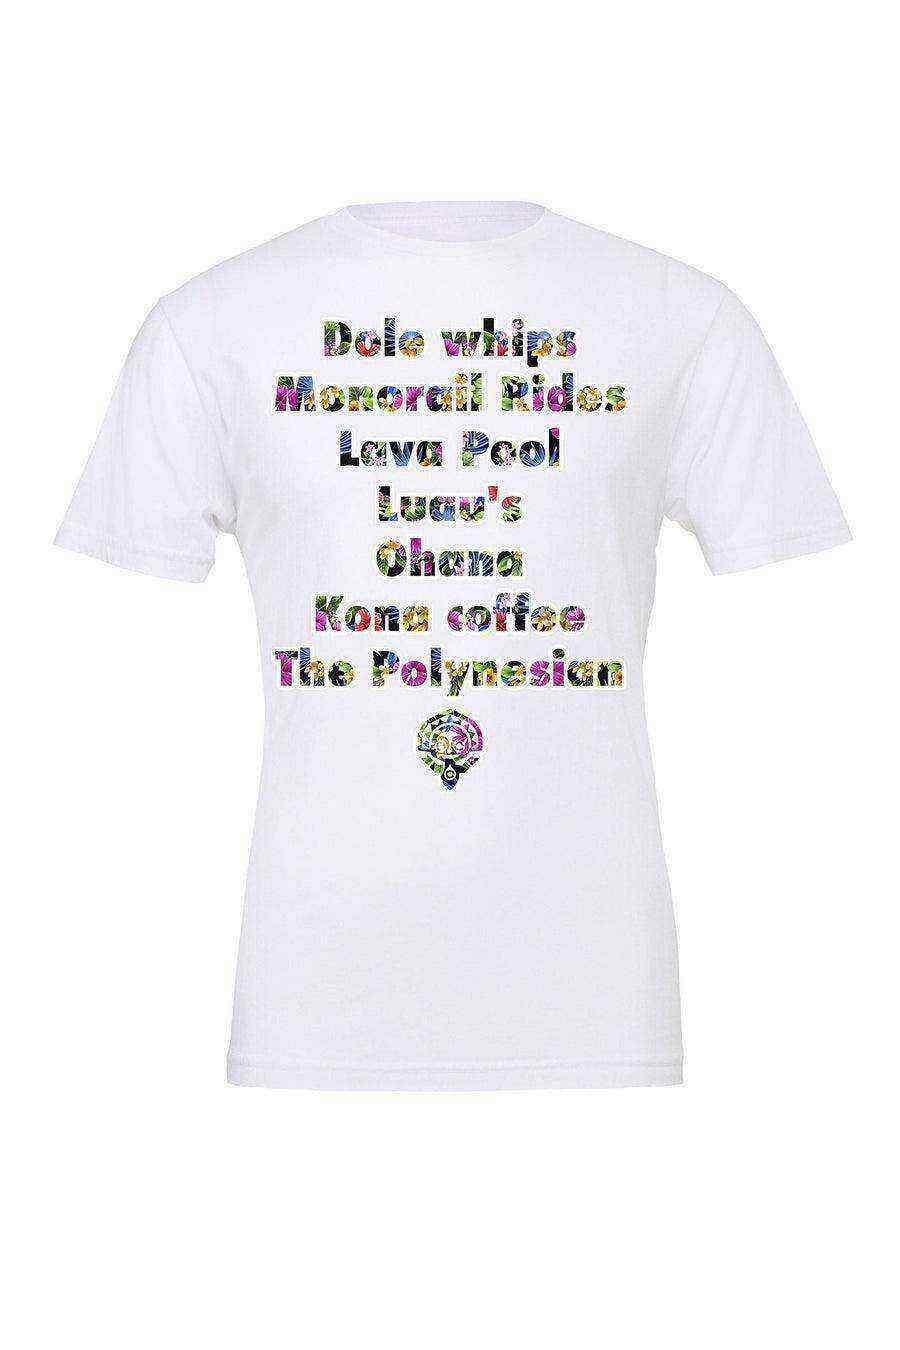 The Polynesian Inspired Tee - Dylan's Tees